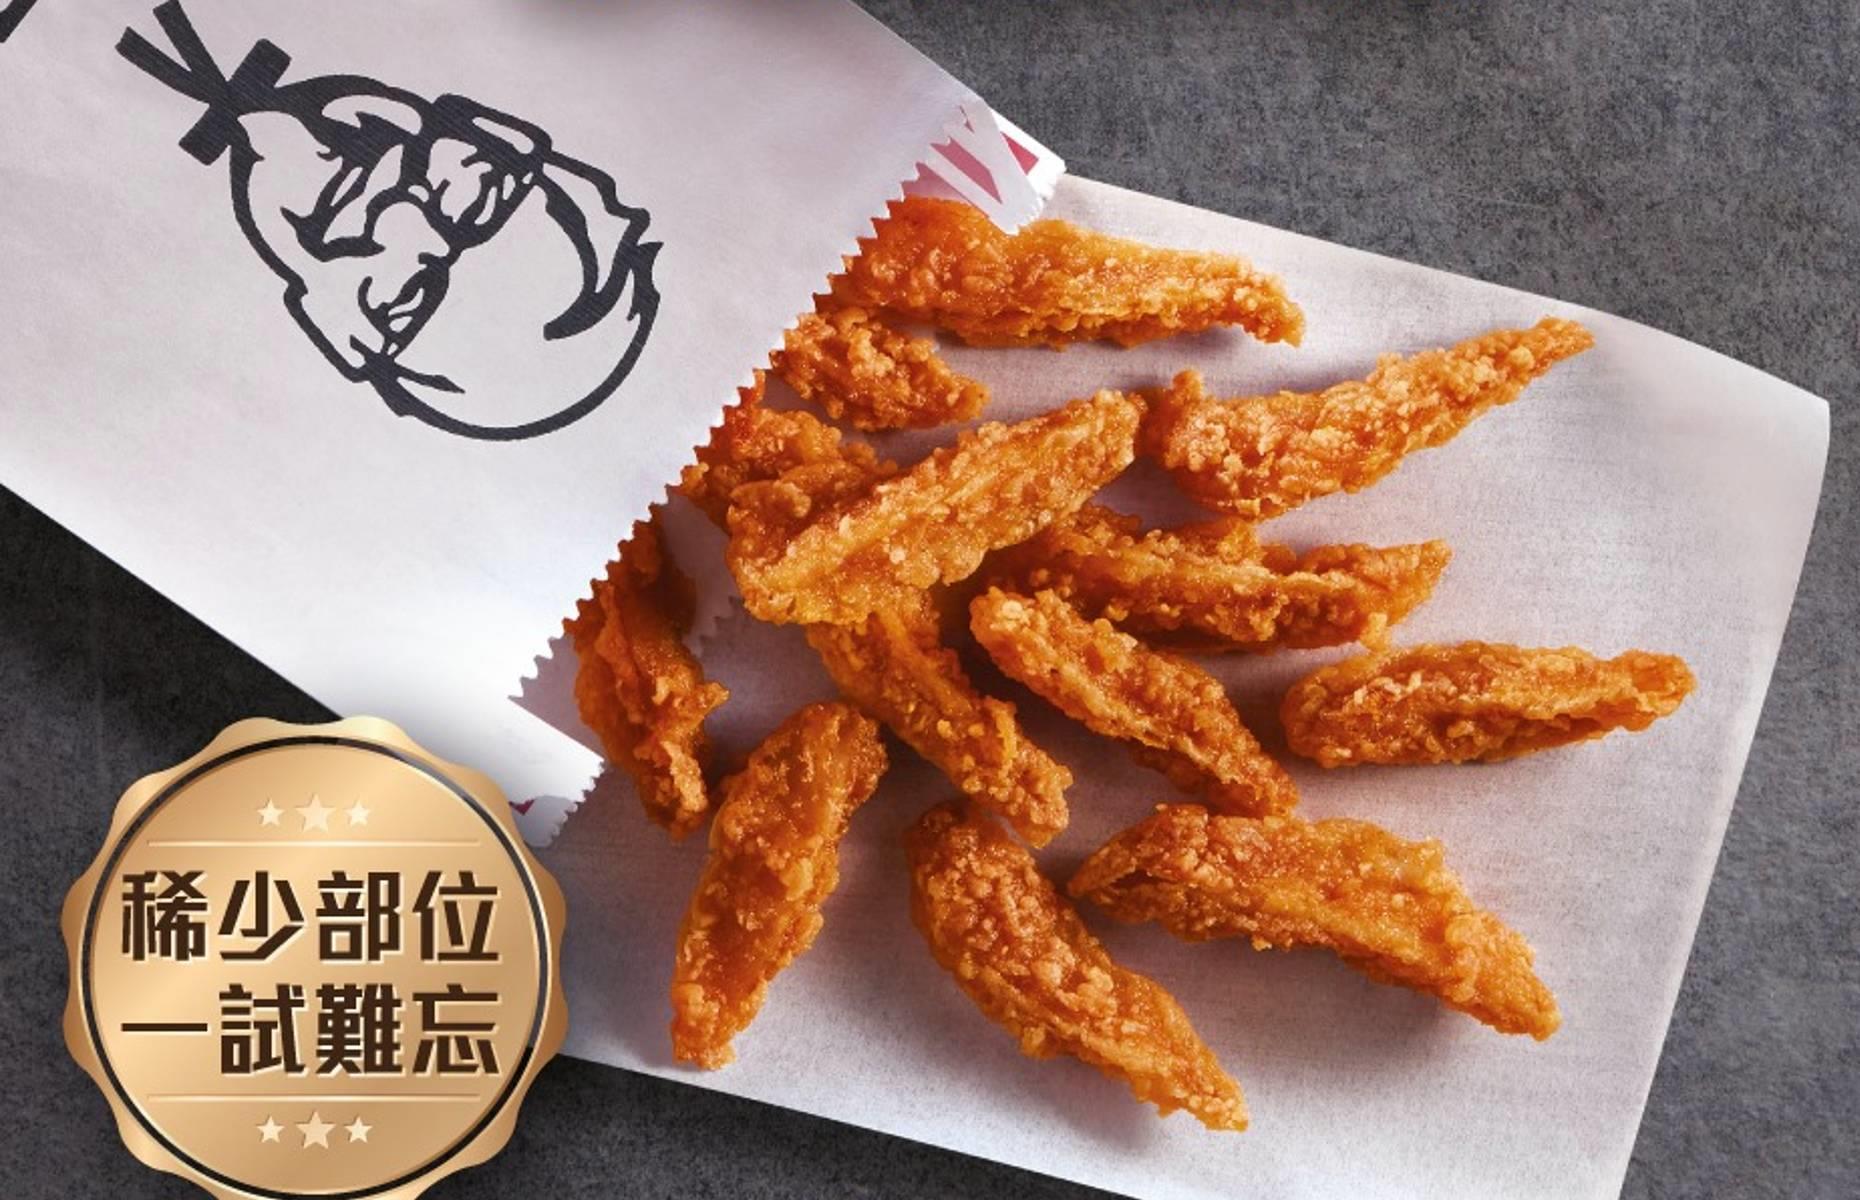 <p>Nose-to-tail eating reached the fast food market when KFC Hong Kong introduced Deep Fried Chicken Cartilage for a limited time in 2021. A common bar snack throughout Asia, it’s crispier and chewier than Original Recipe chicken and nicely seasoned with spices.</p>